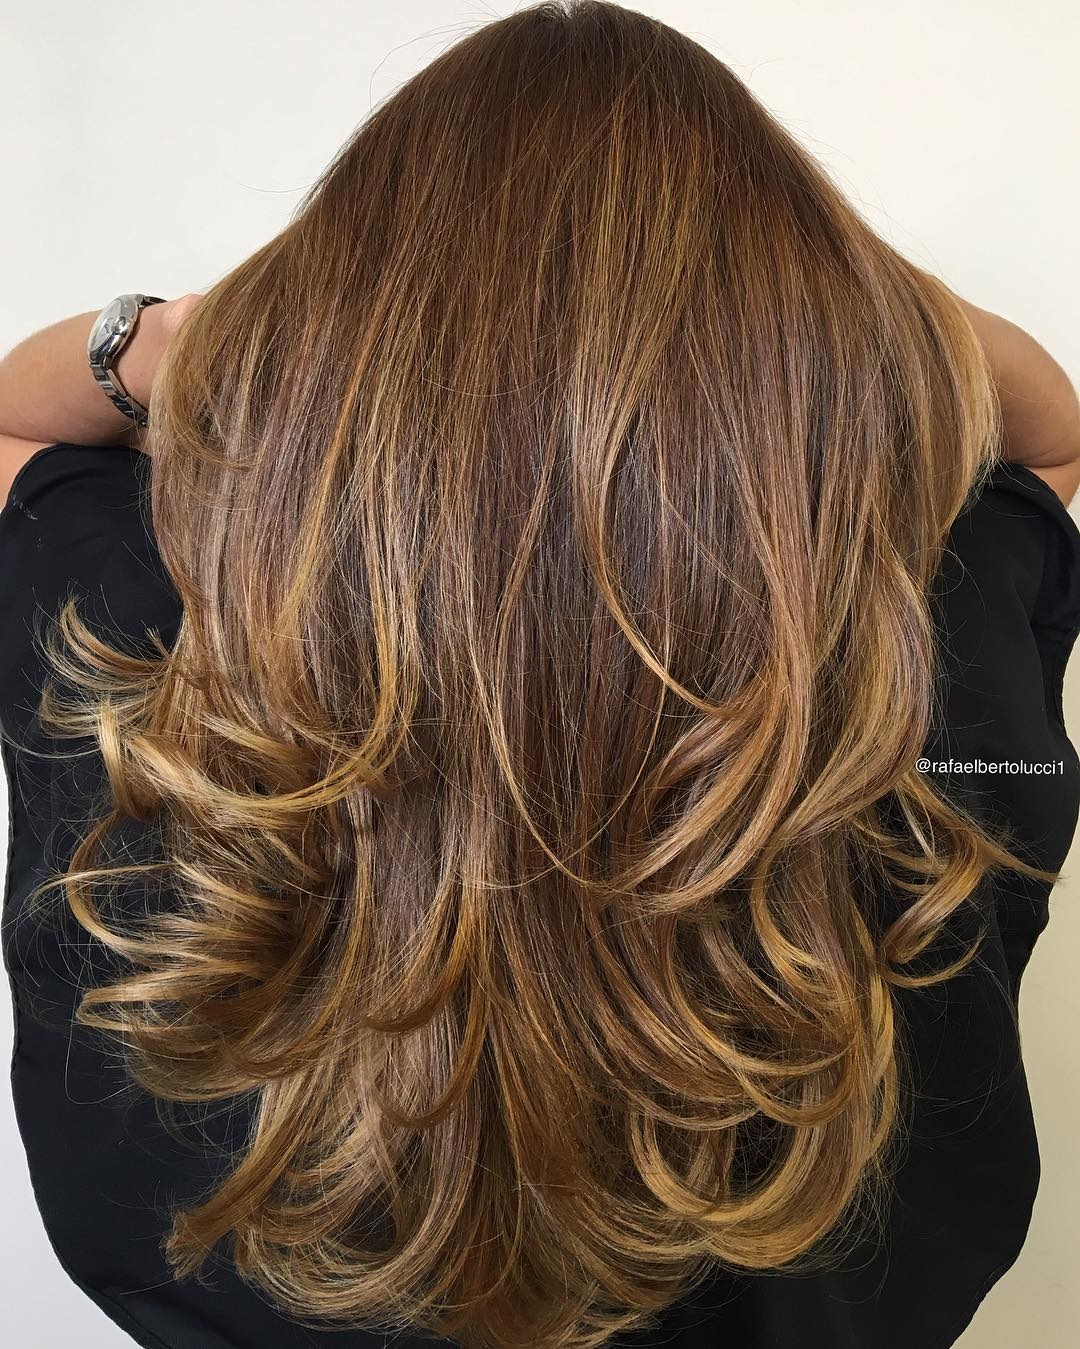 20 Golden Brown Hair Color Ideas All Brunettes Need to See